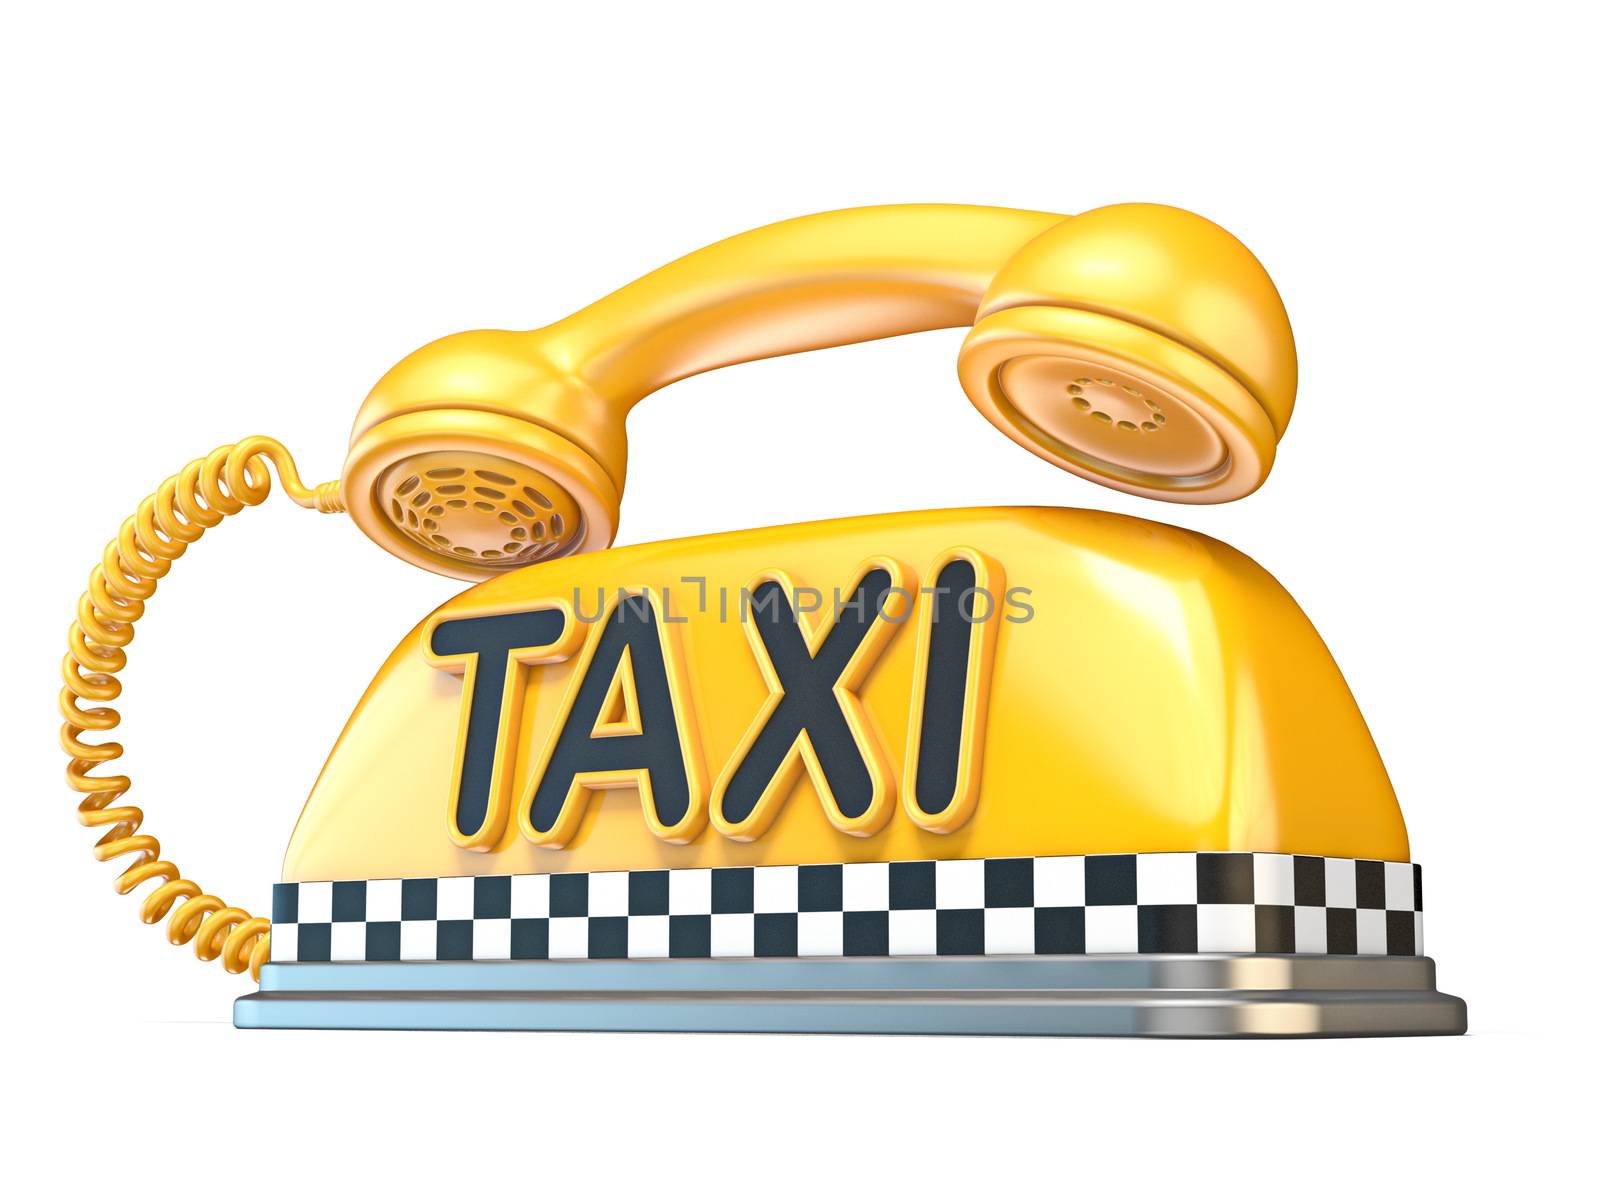 Taxi sign with telephone handset 3D rendering illustration isolated on white background